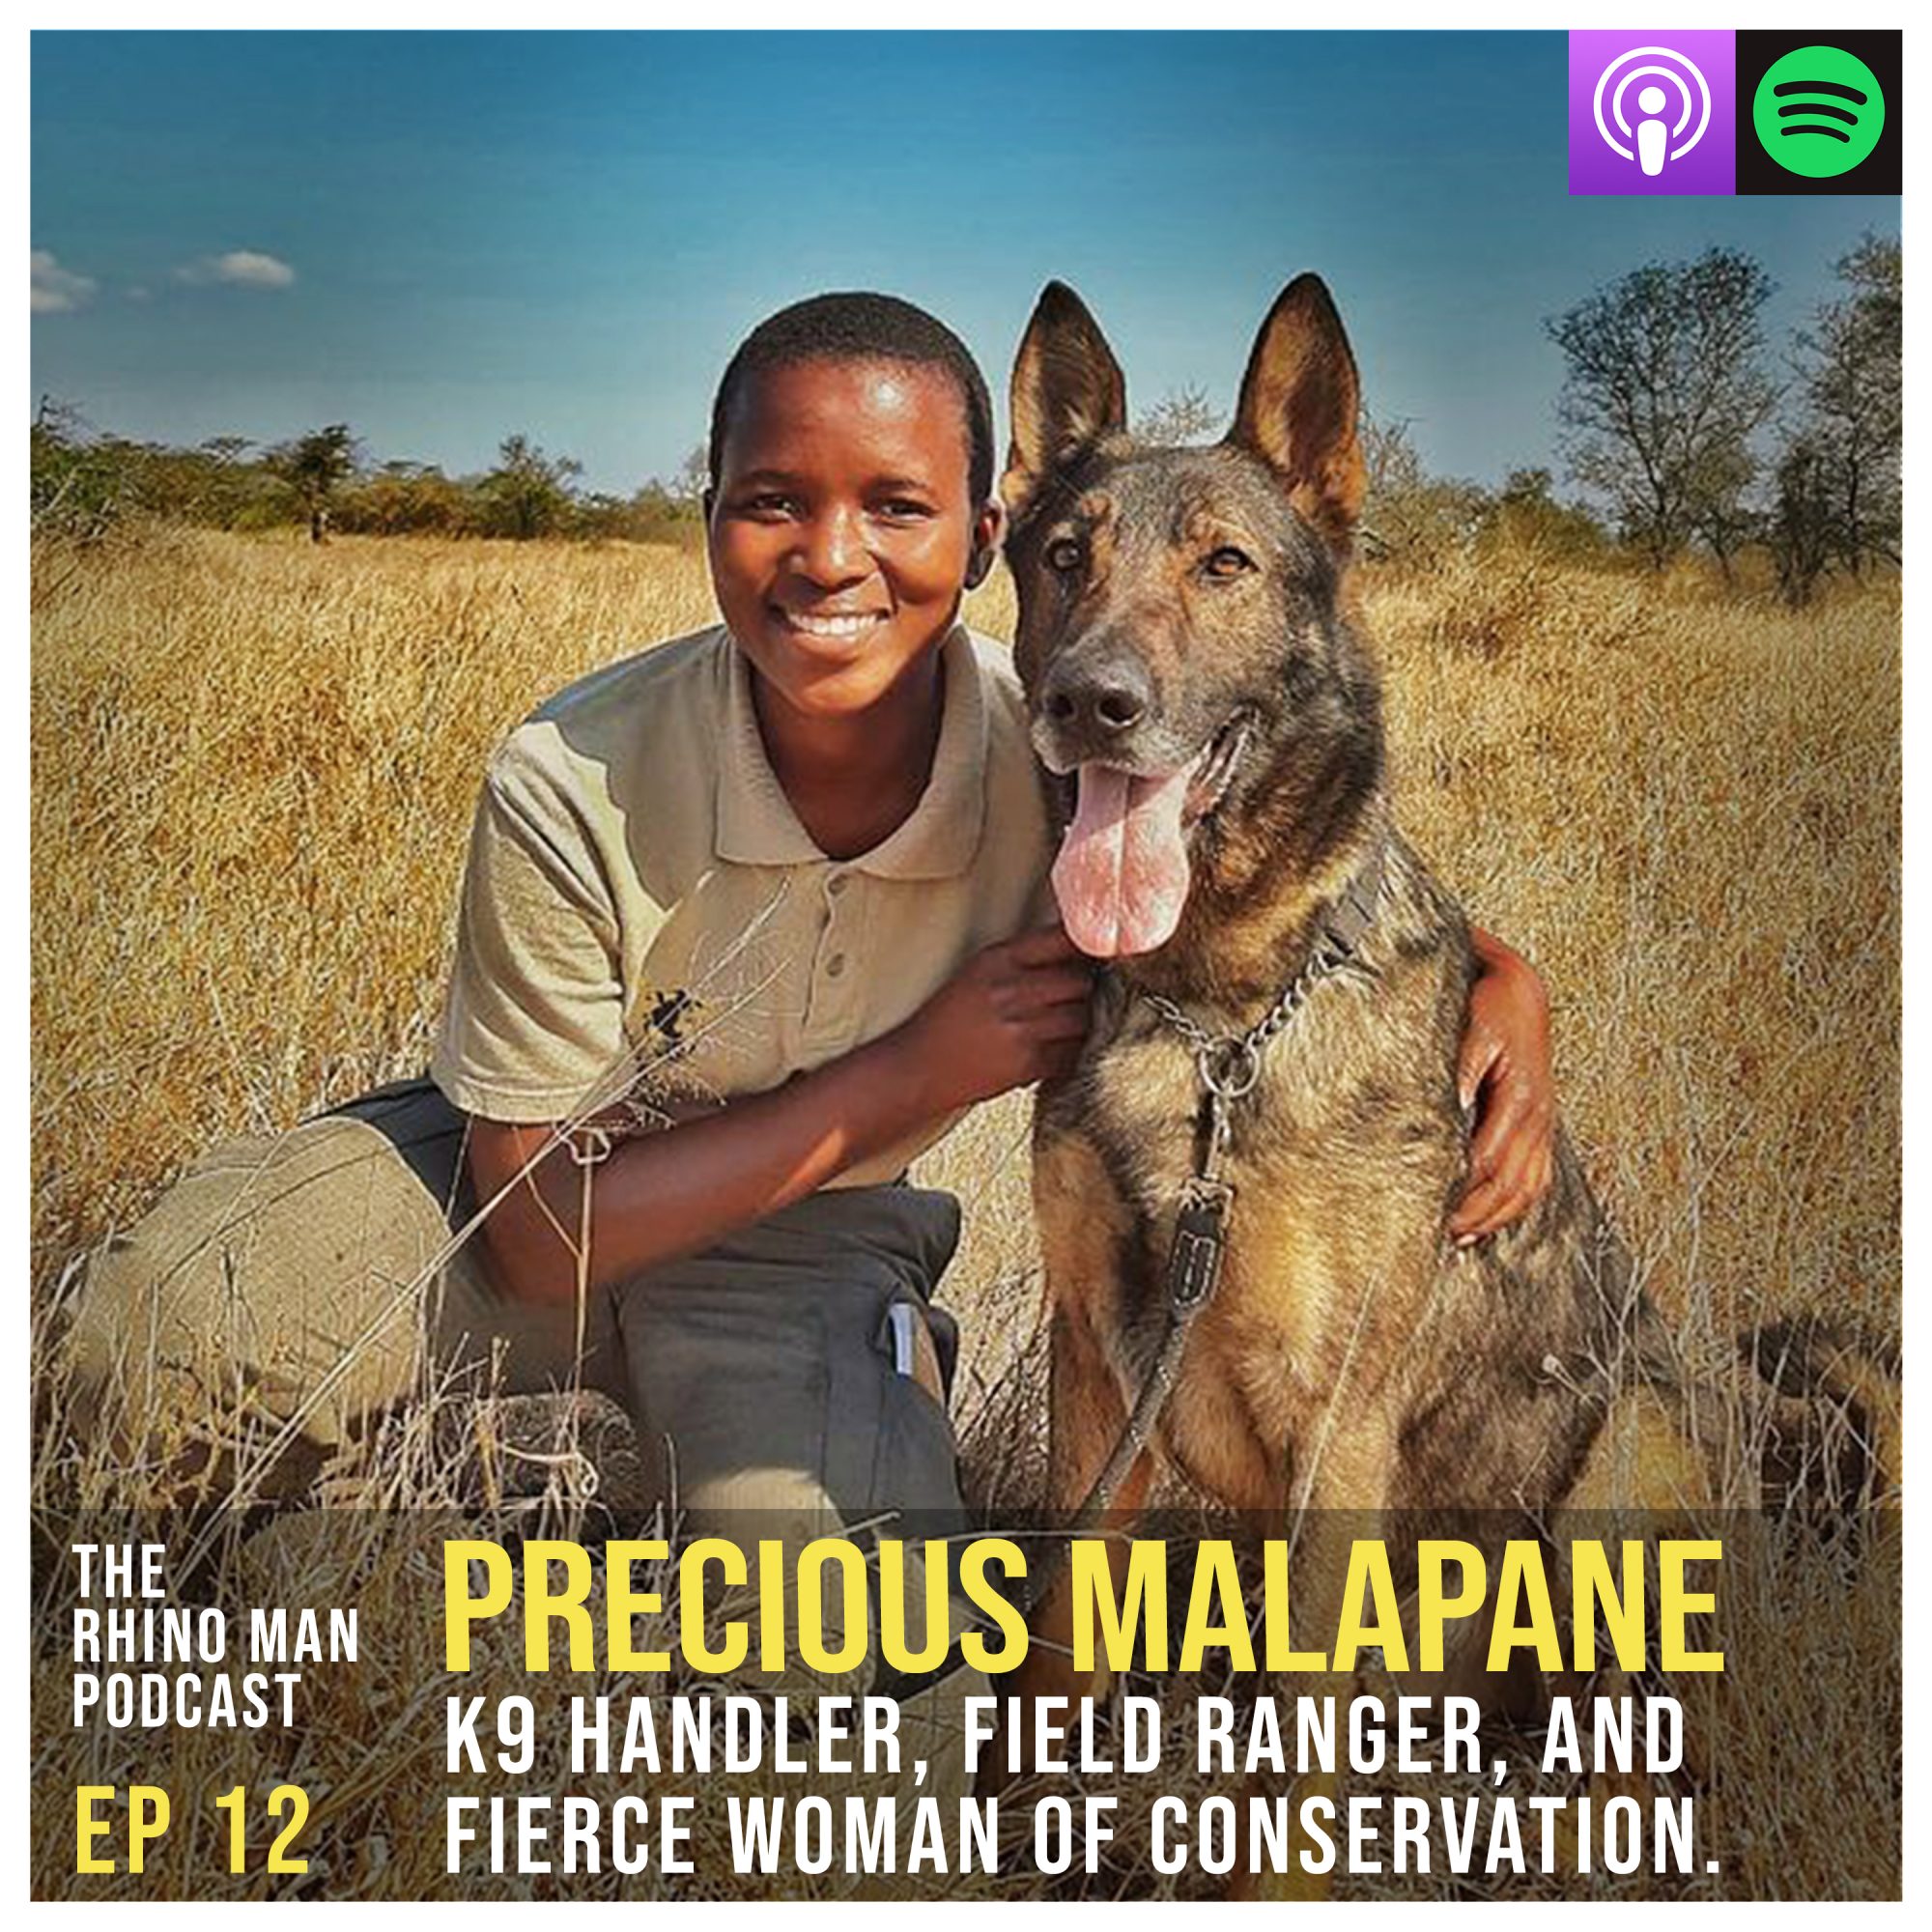 Ep 12: Precious Malapane – K9 handler, field ranger, and fierce woman of conservation.